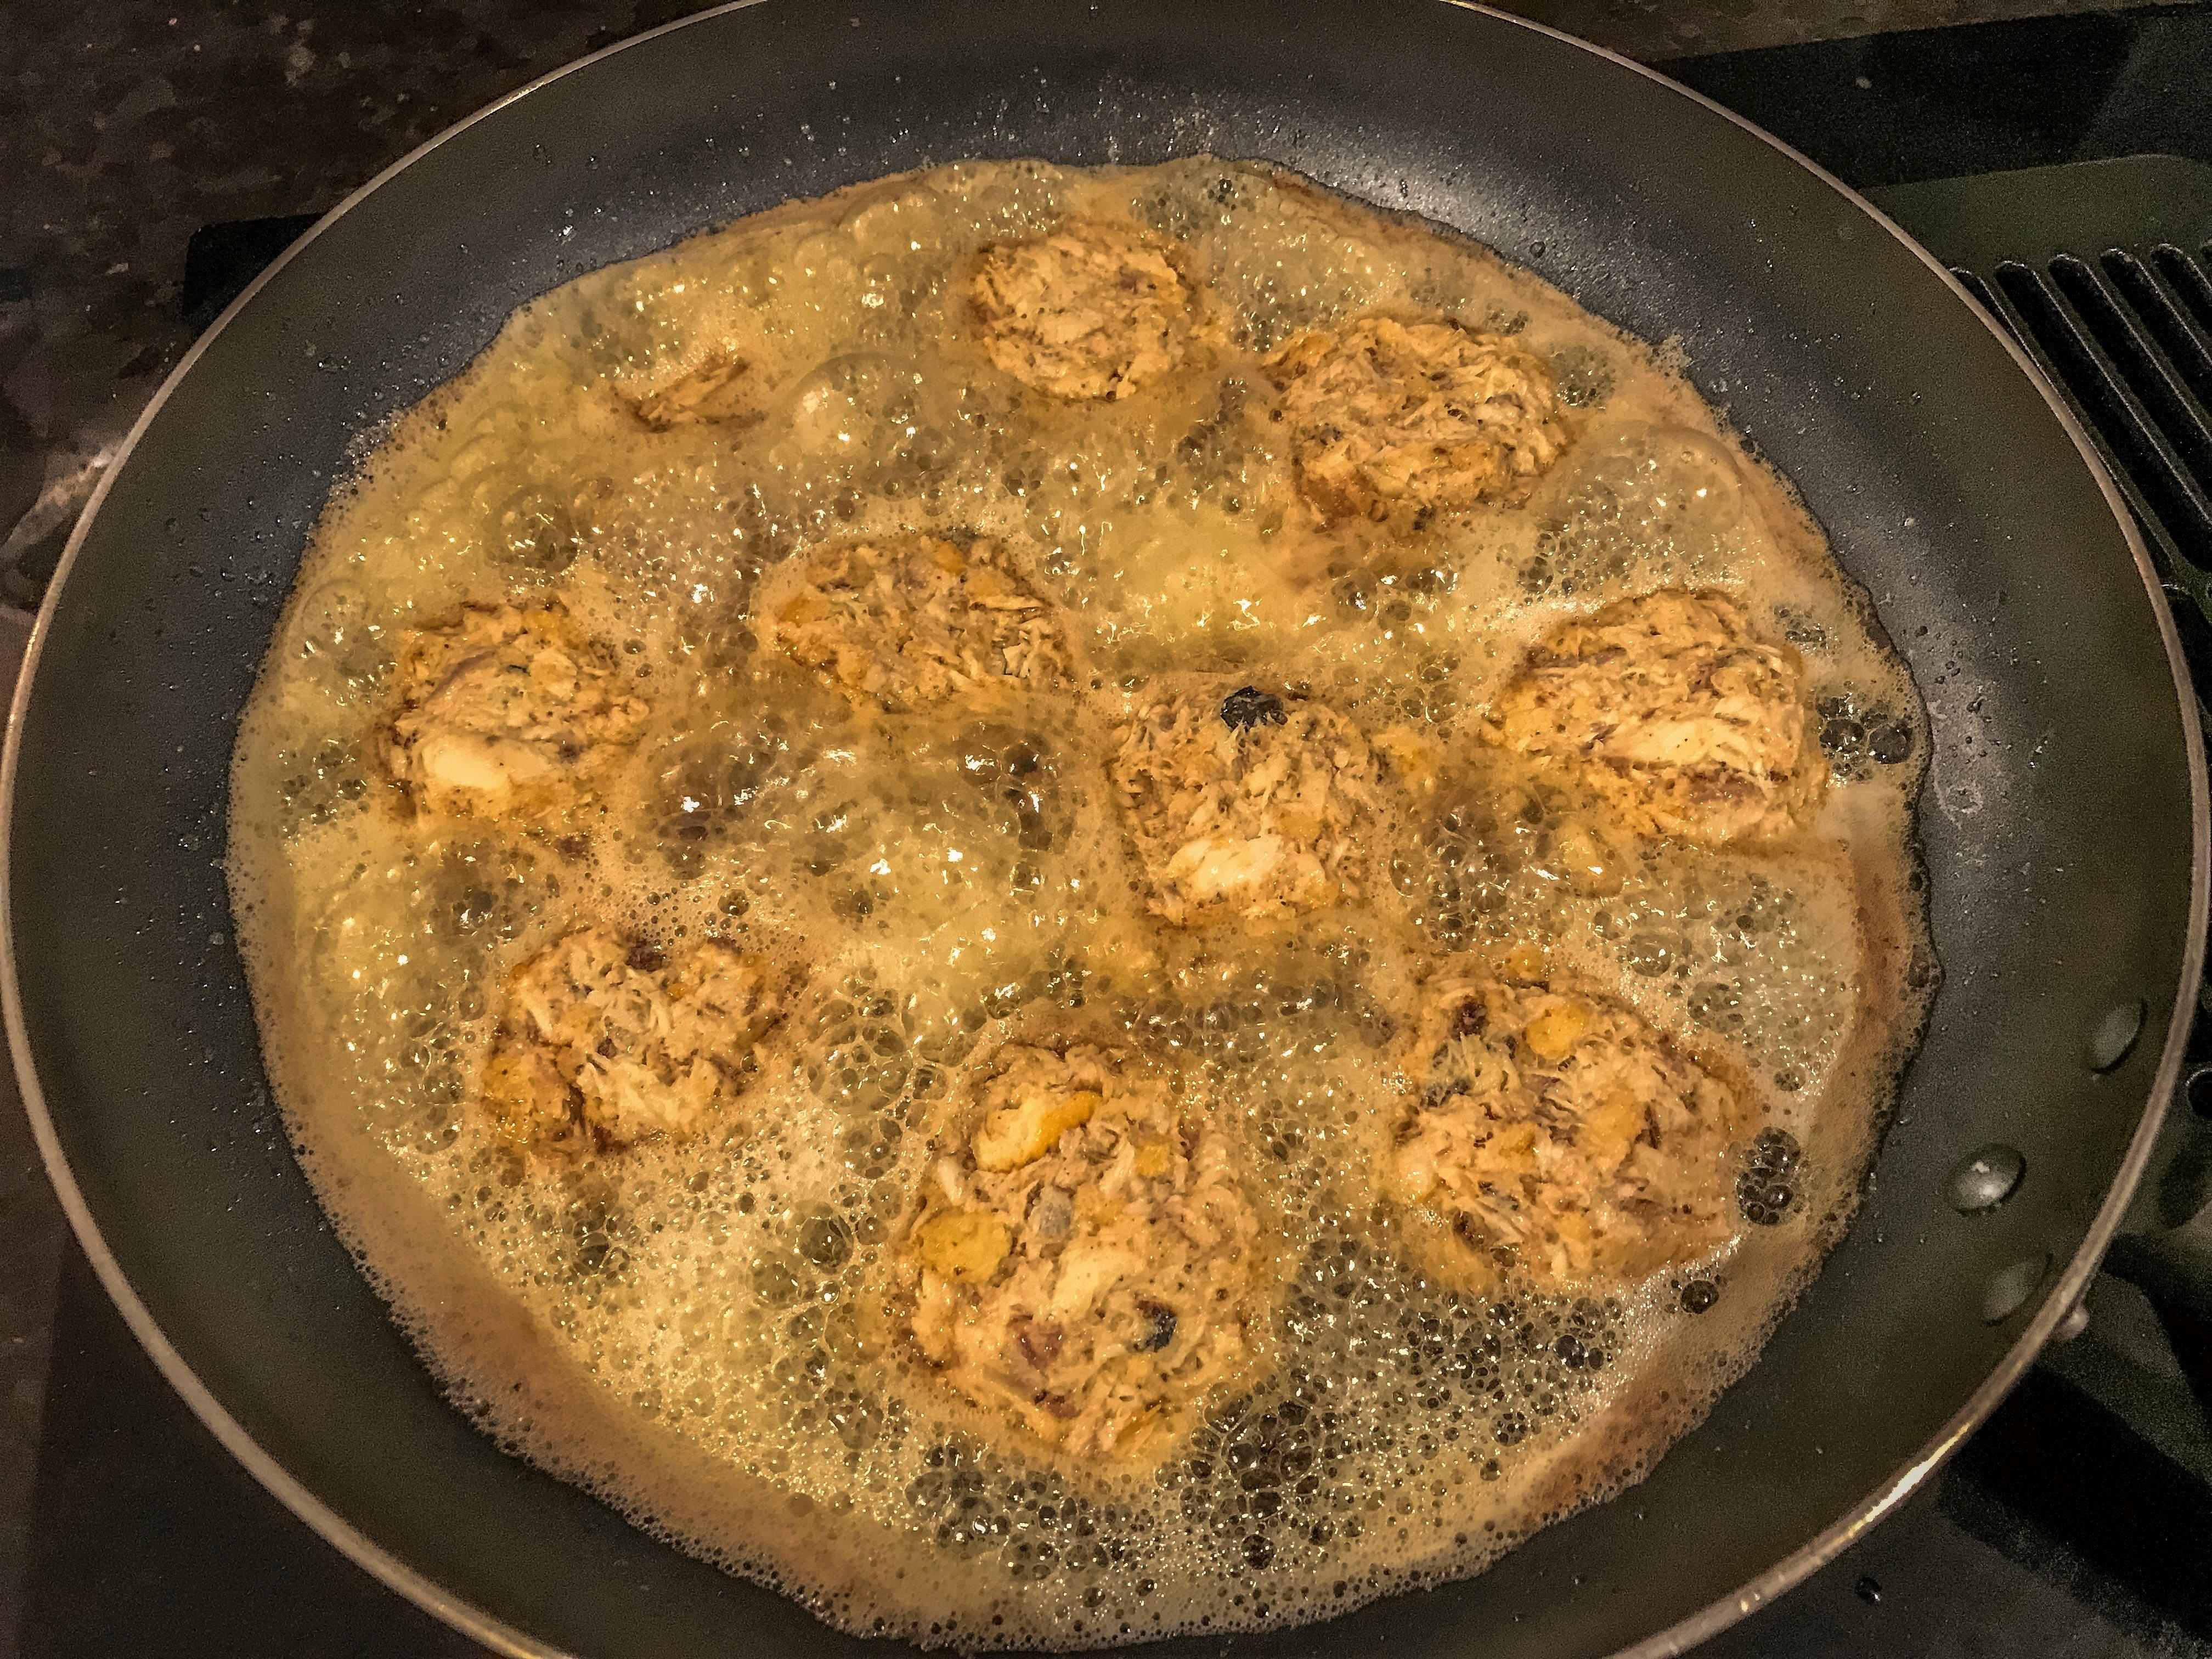 Fry the fish cakes in peanut oil.